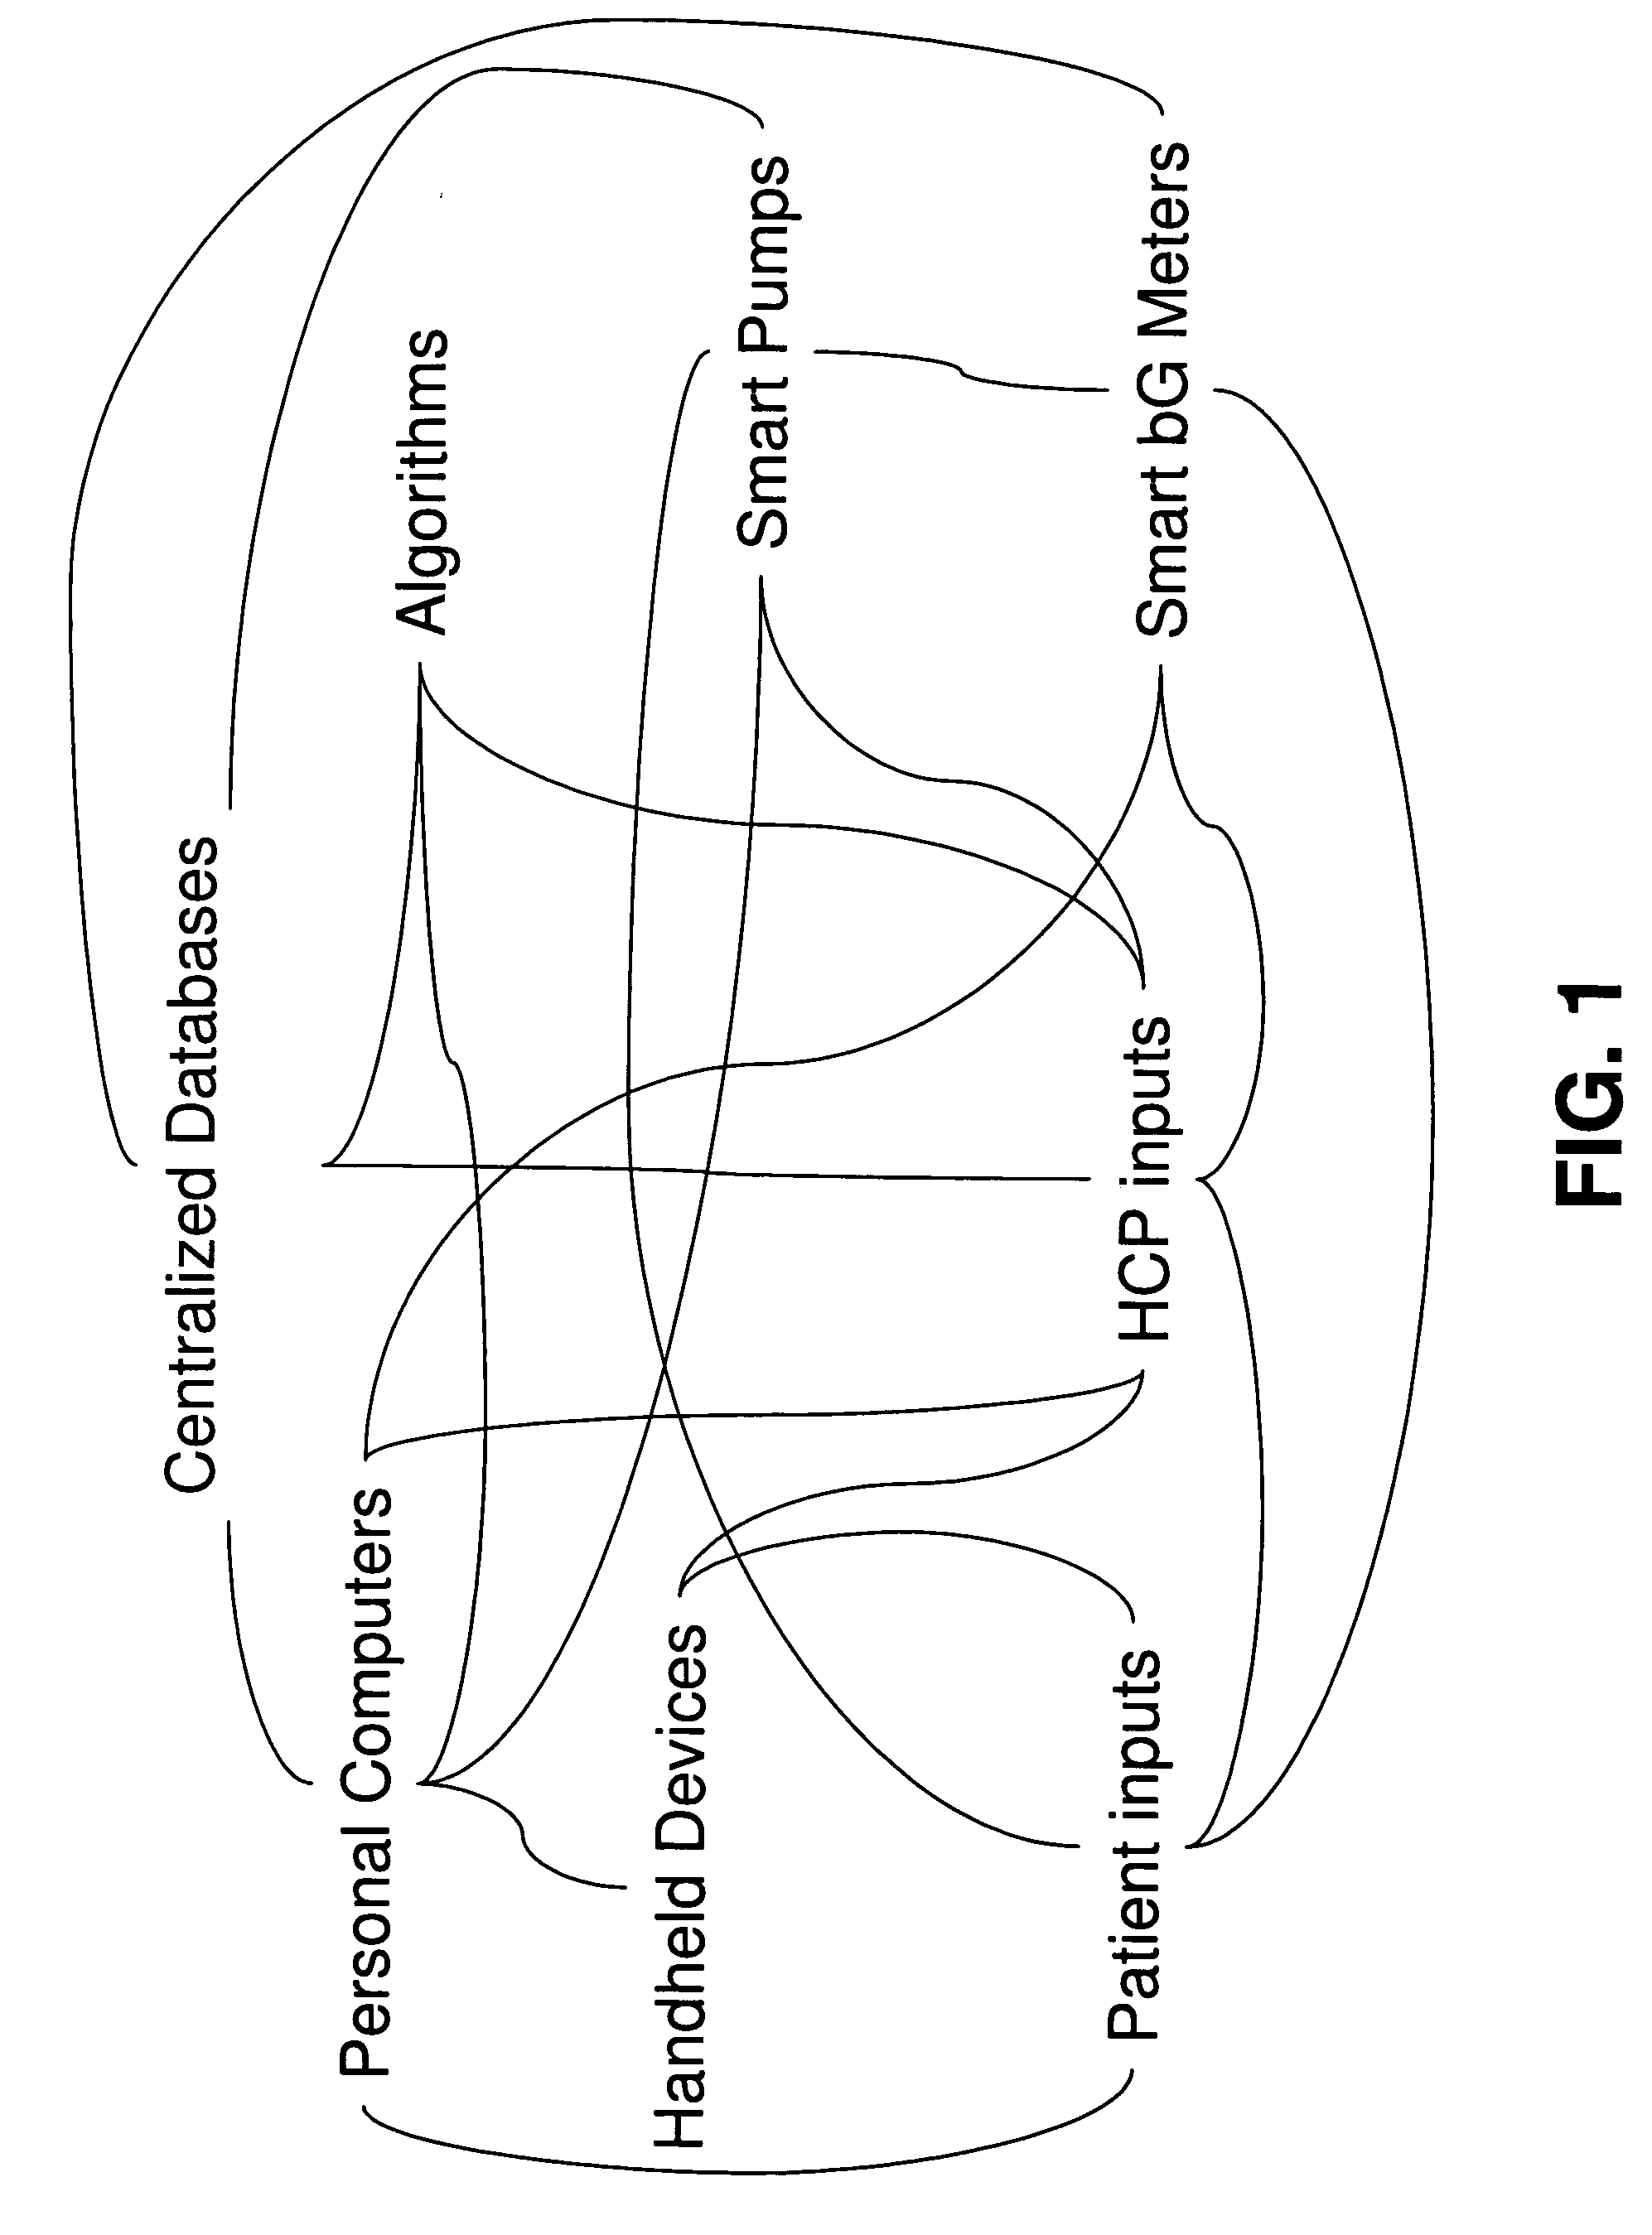 Medical Diagnosis, Therapy, And Prognosis System For Invoked Events And Methods Thereof